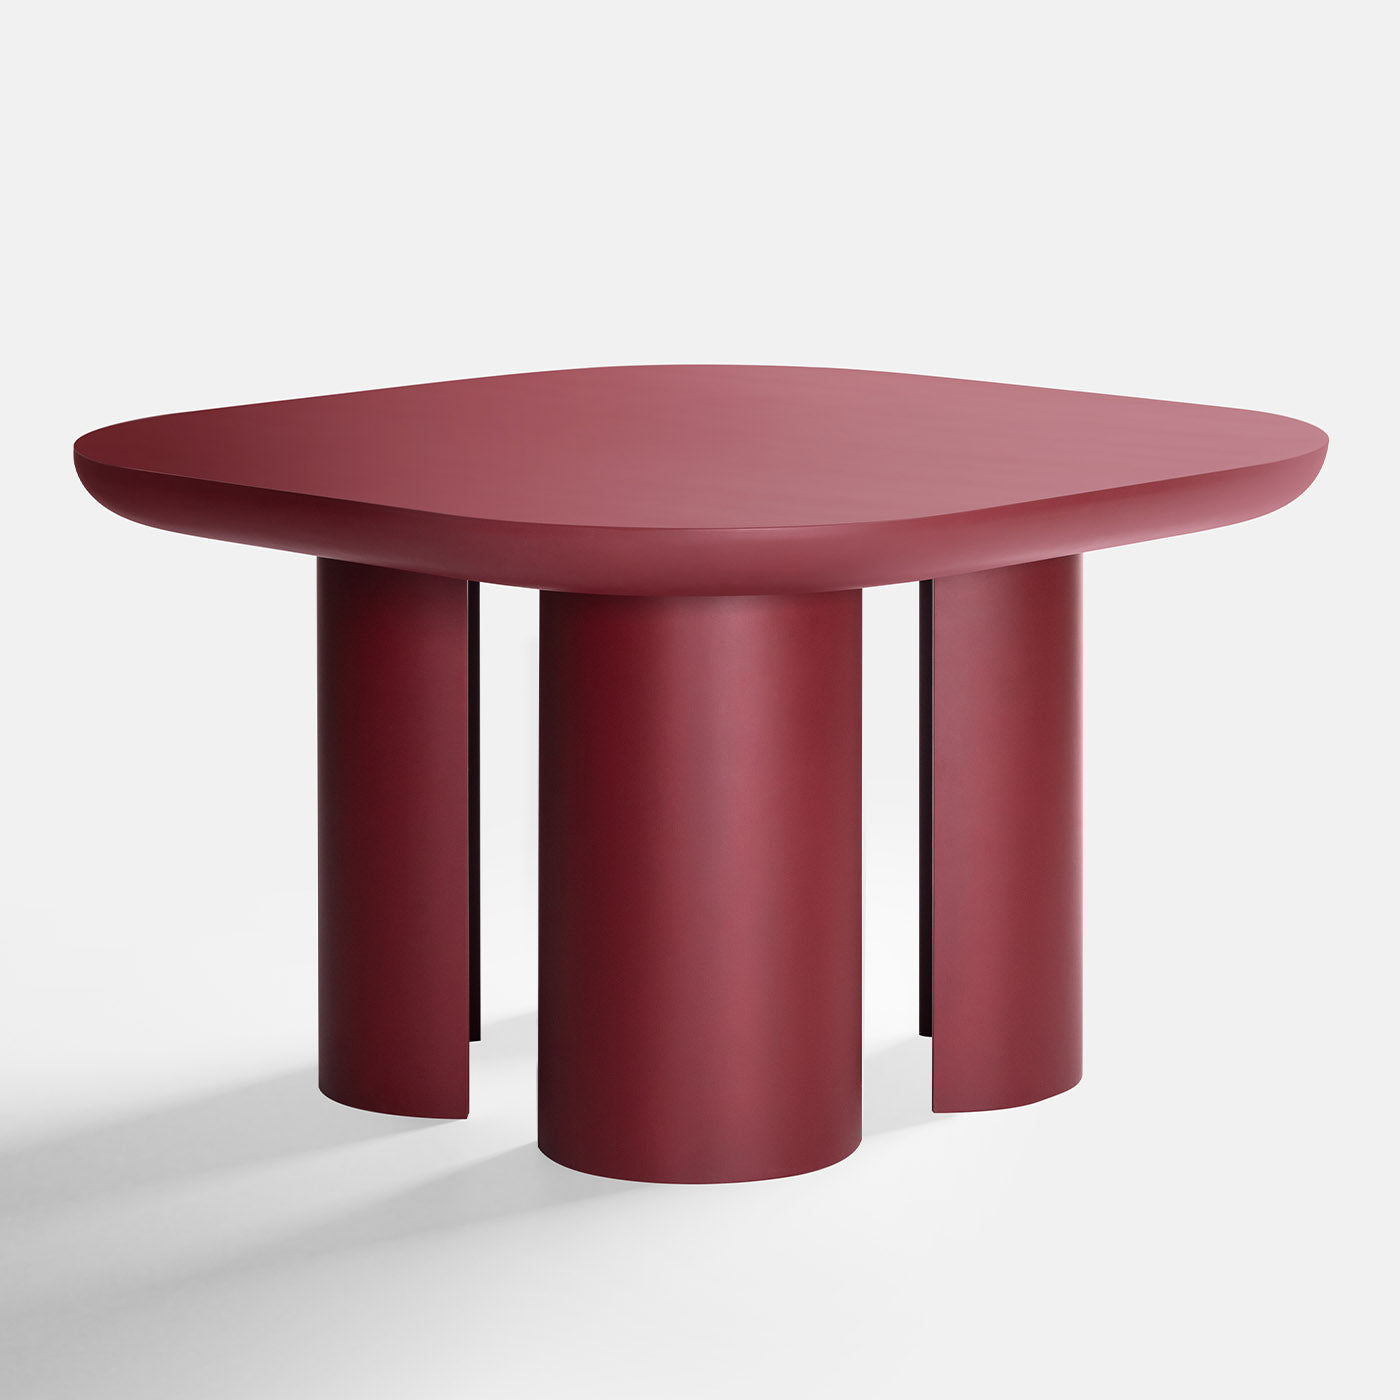 Turno Red Dining Table - Alternative view 5